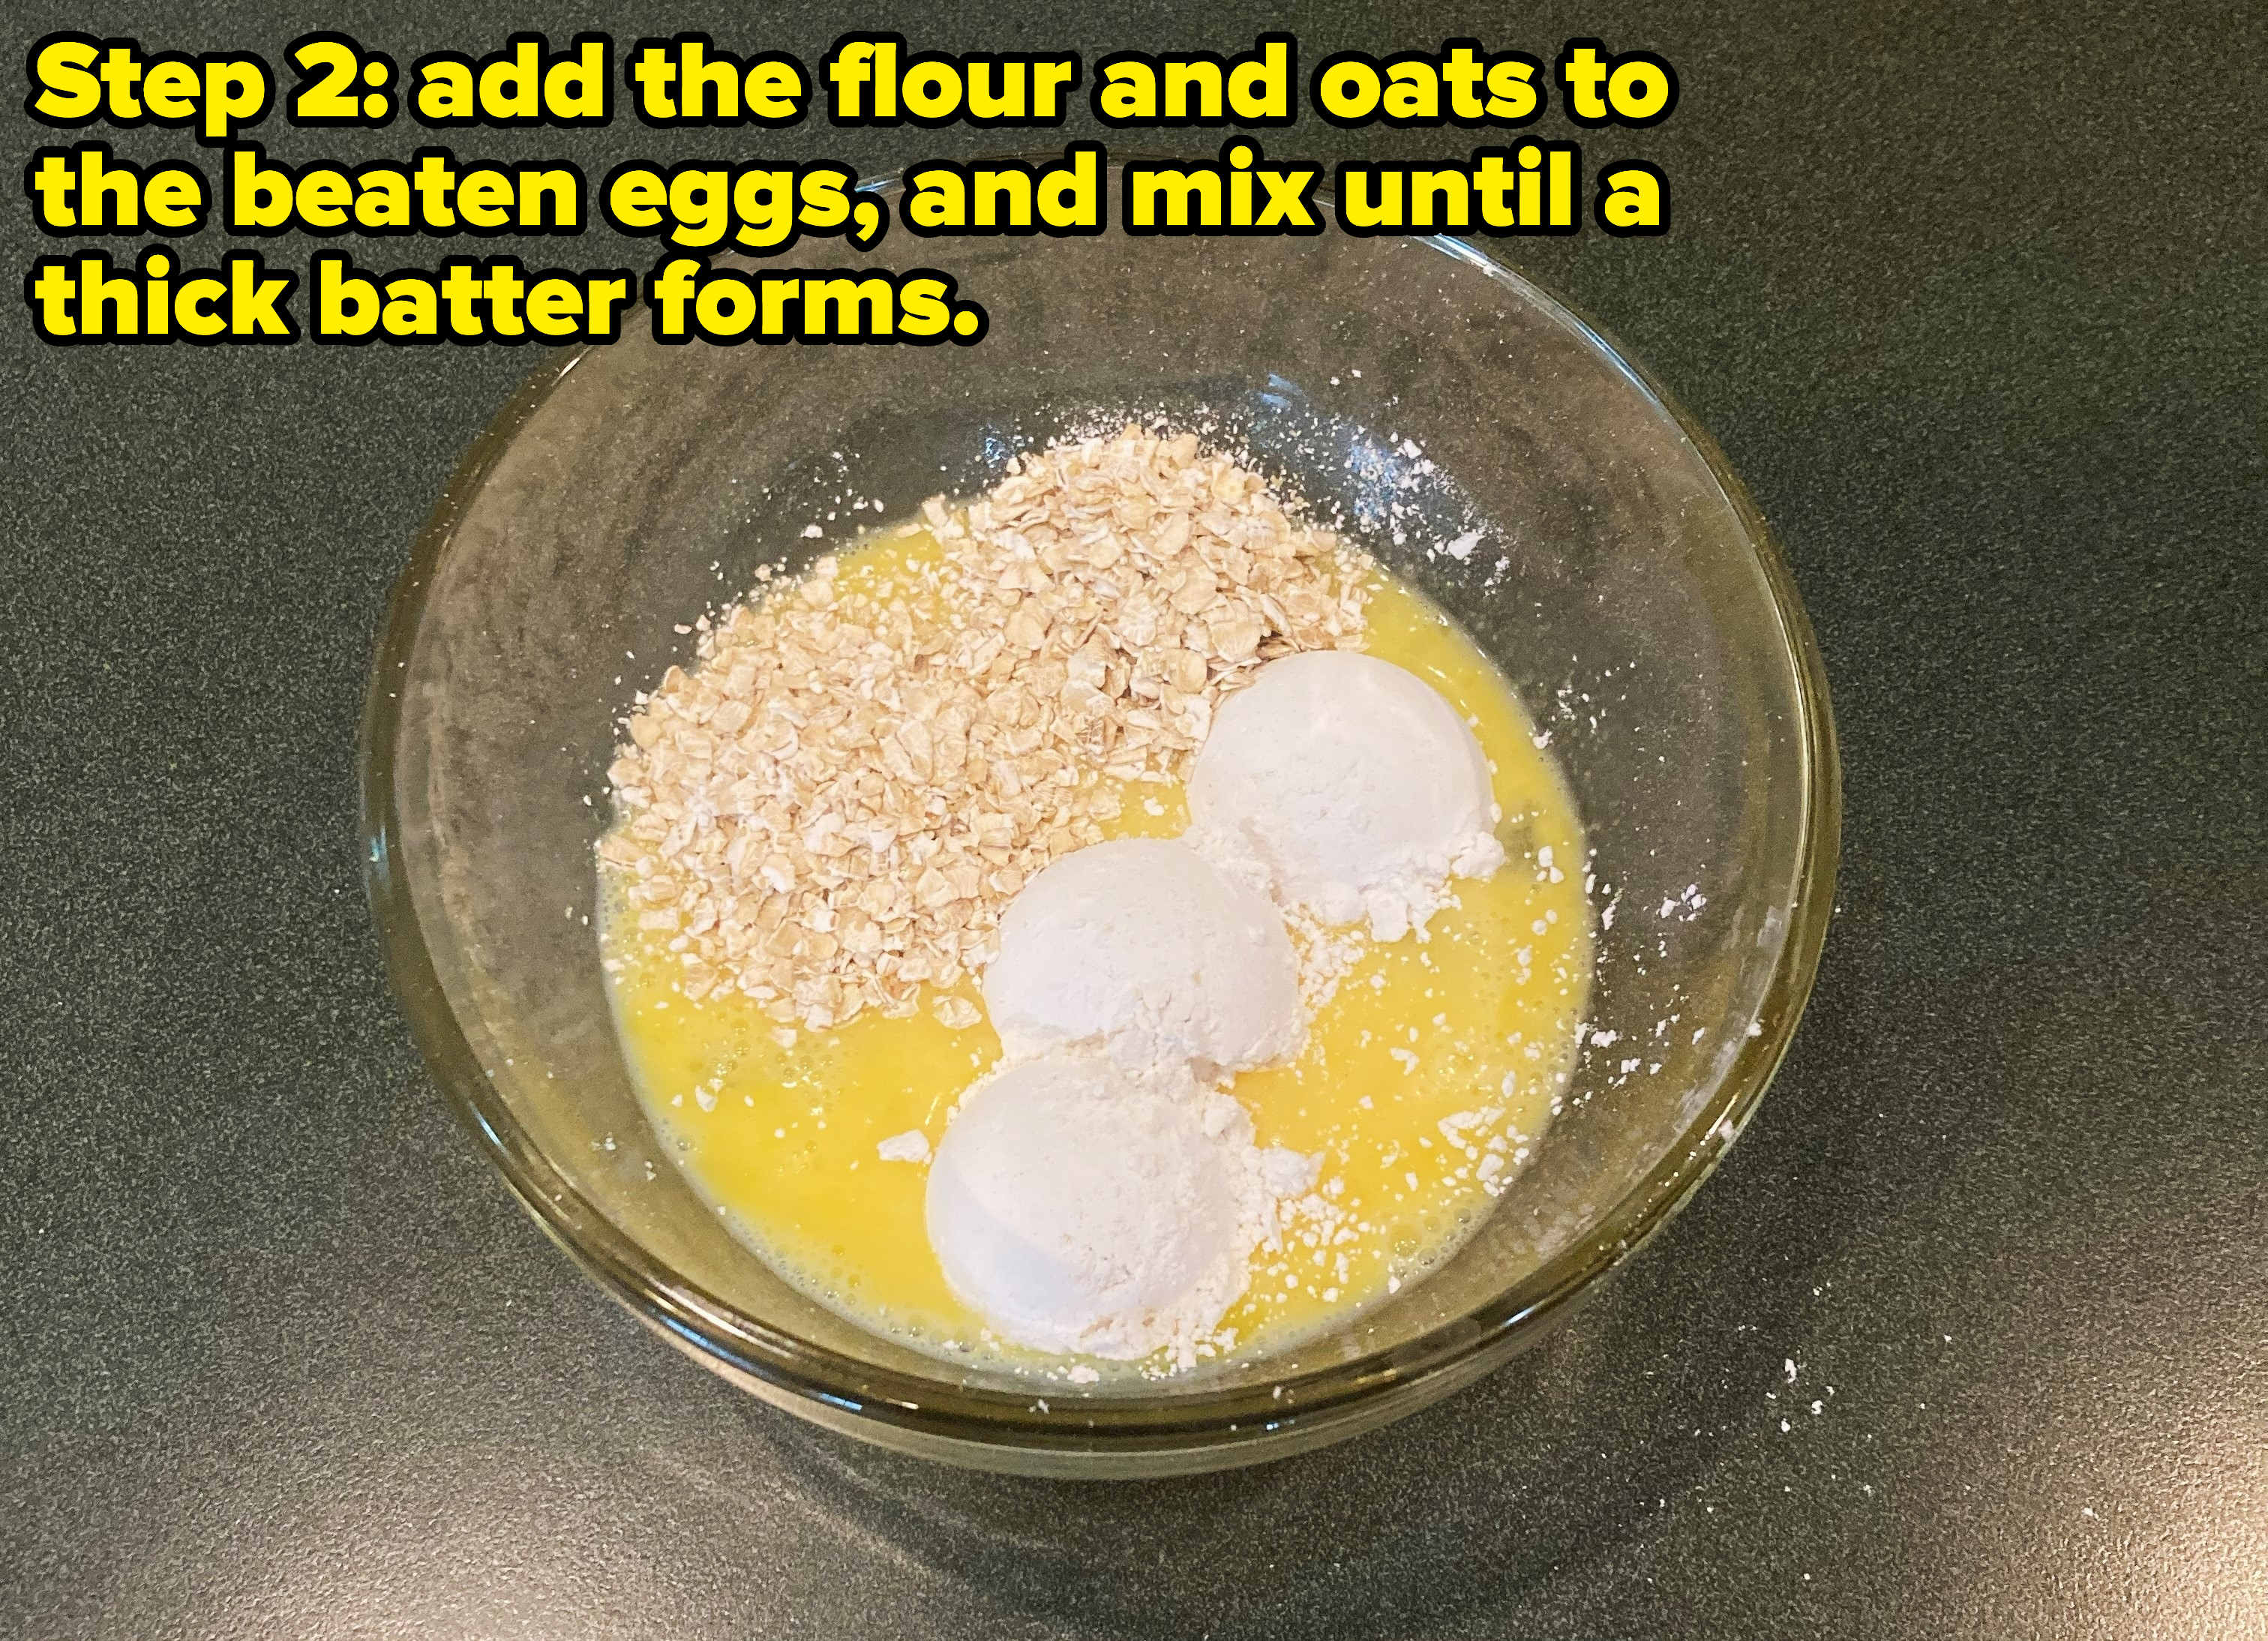 photo of step 2 with the the words &quot;add the flour and oats to the beaten eggs, and mix until a thick batter forms&quot;